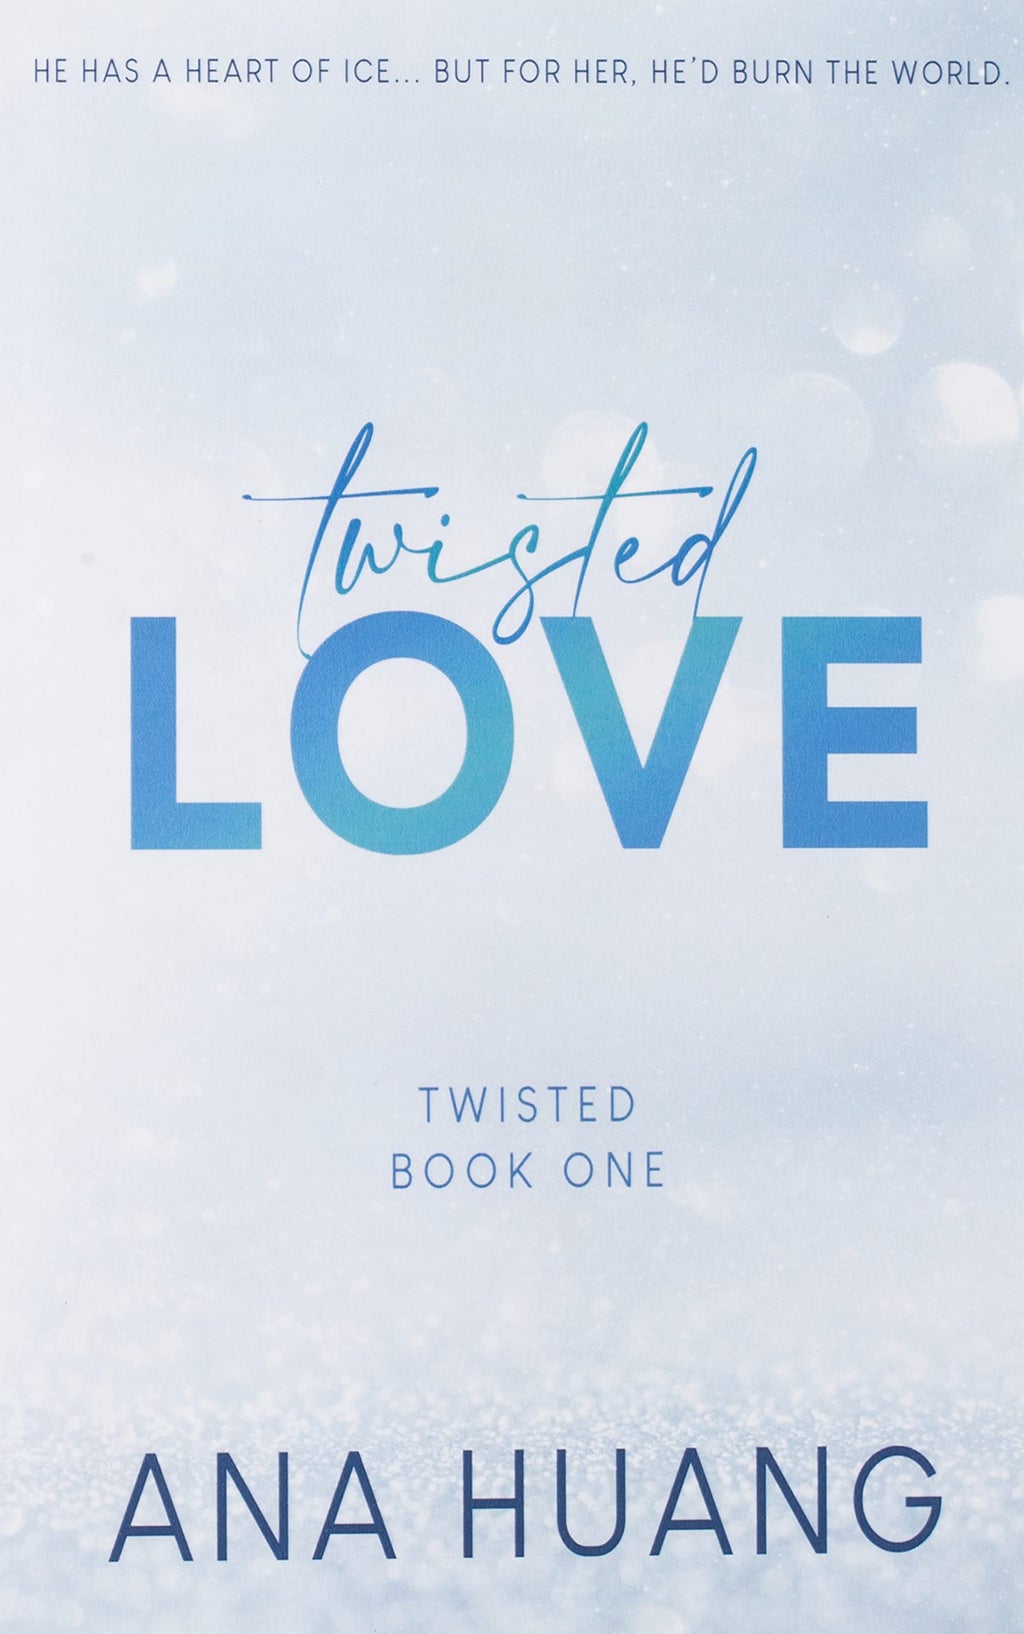 Cover of Twisted Love book; light blue and white, with gradient blue lettering